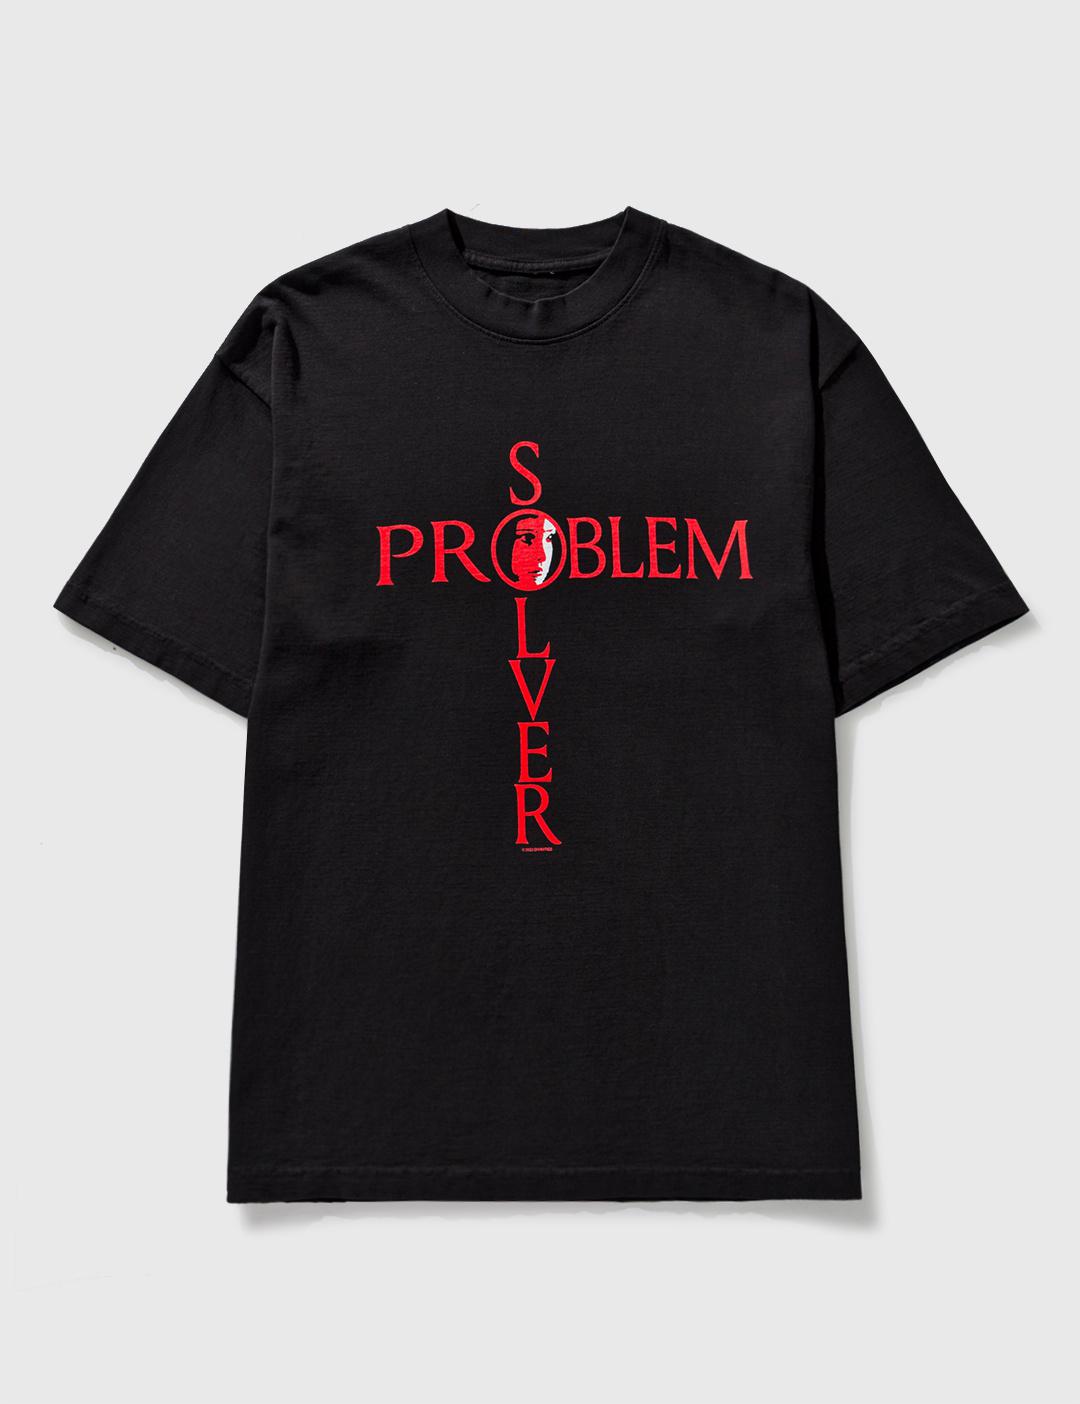 Problem Solver T-shirt by DIVINITIES